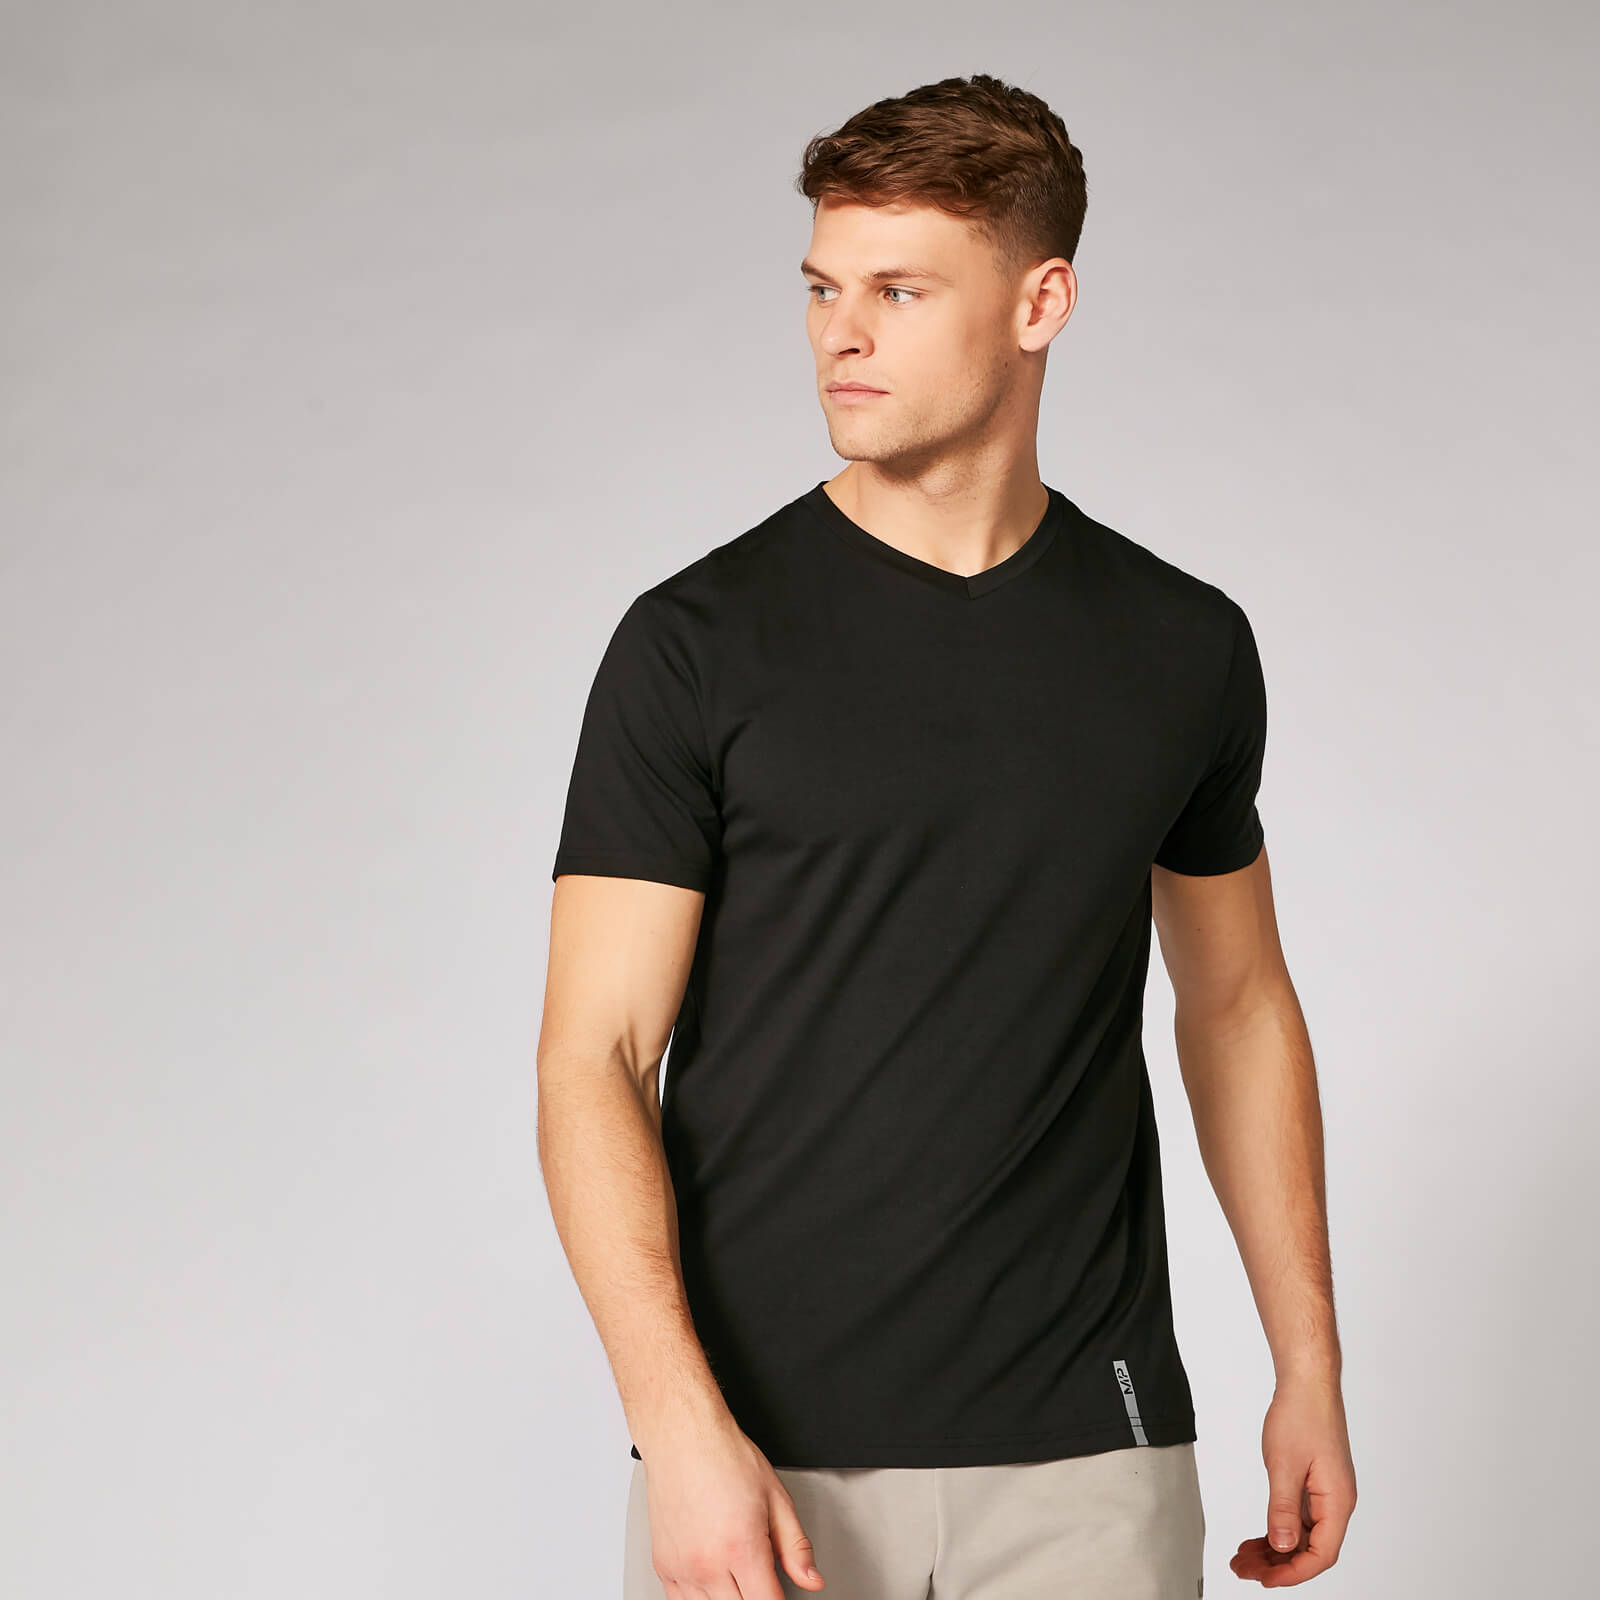 Myprotein Luxe Classic V-Neck T-Shirt - Black - S